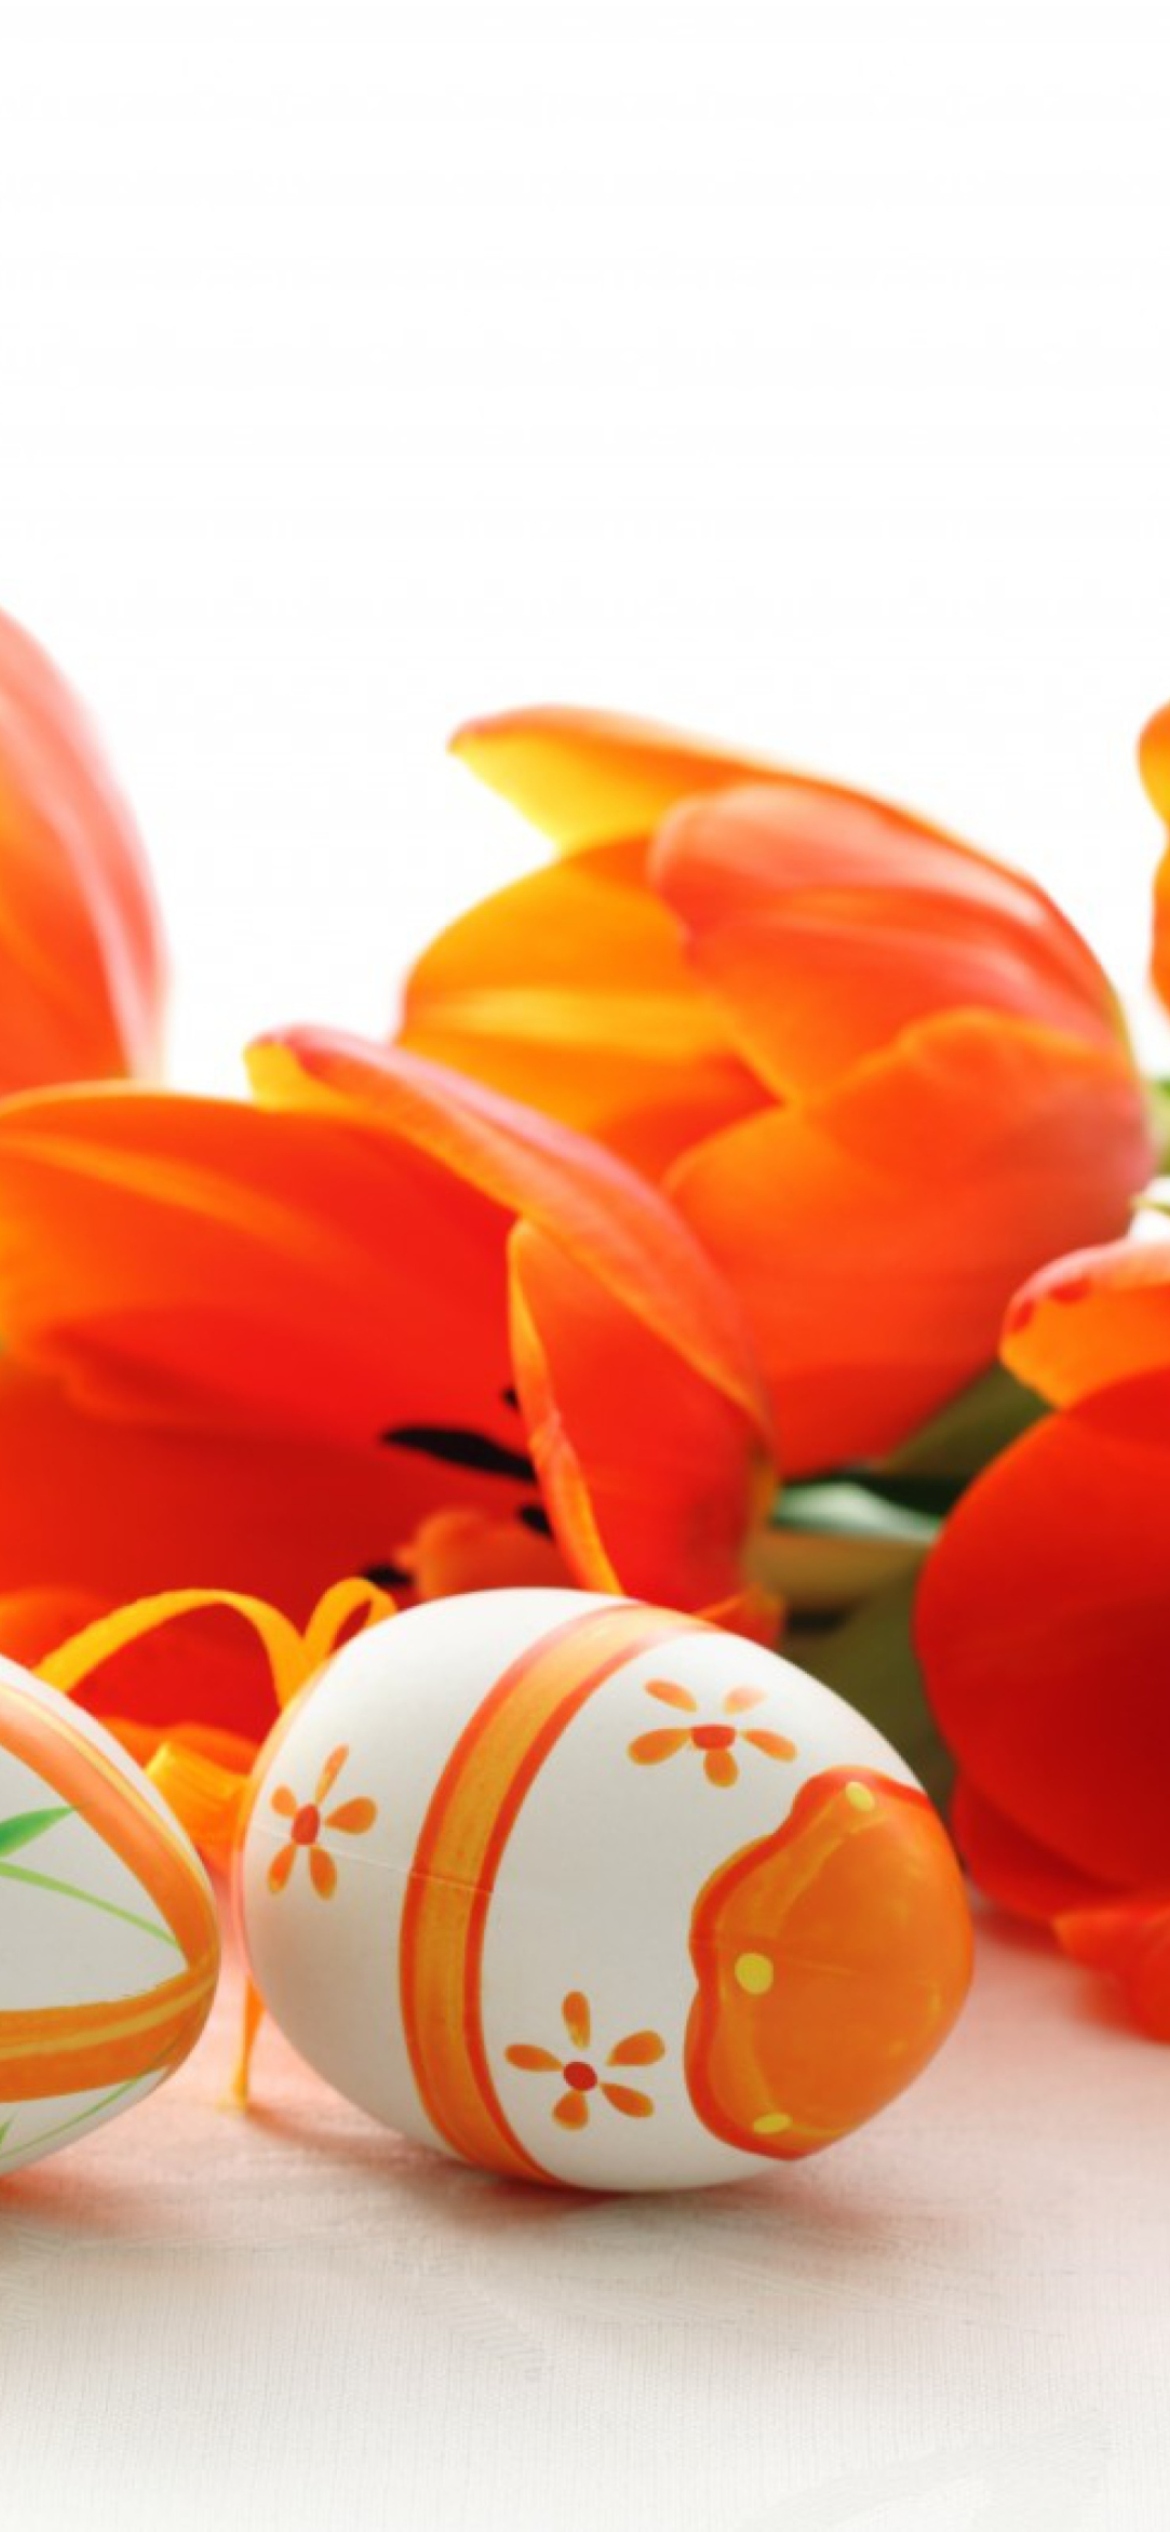 Eggs And Tulips wallpaper 1170x2532